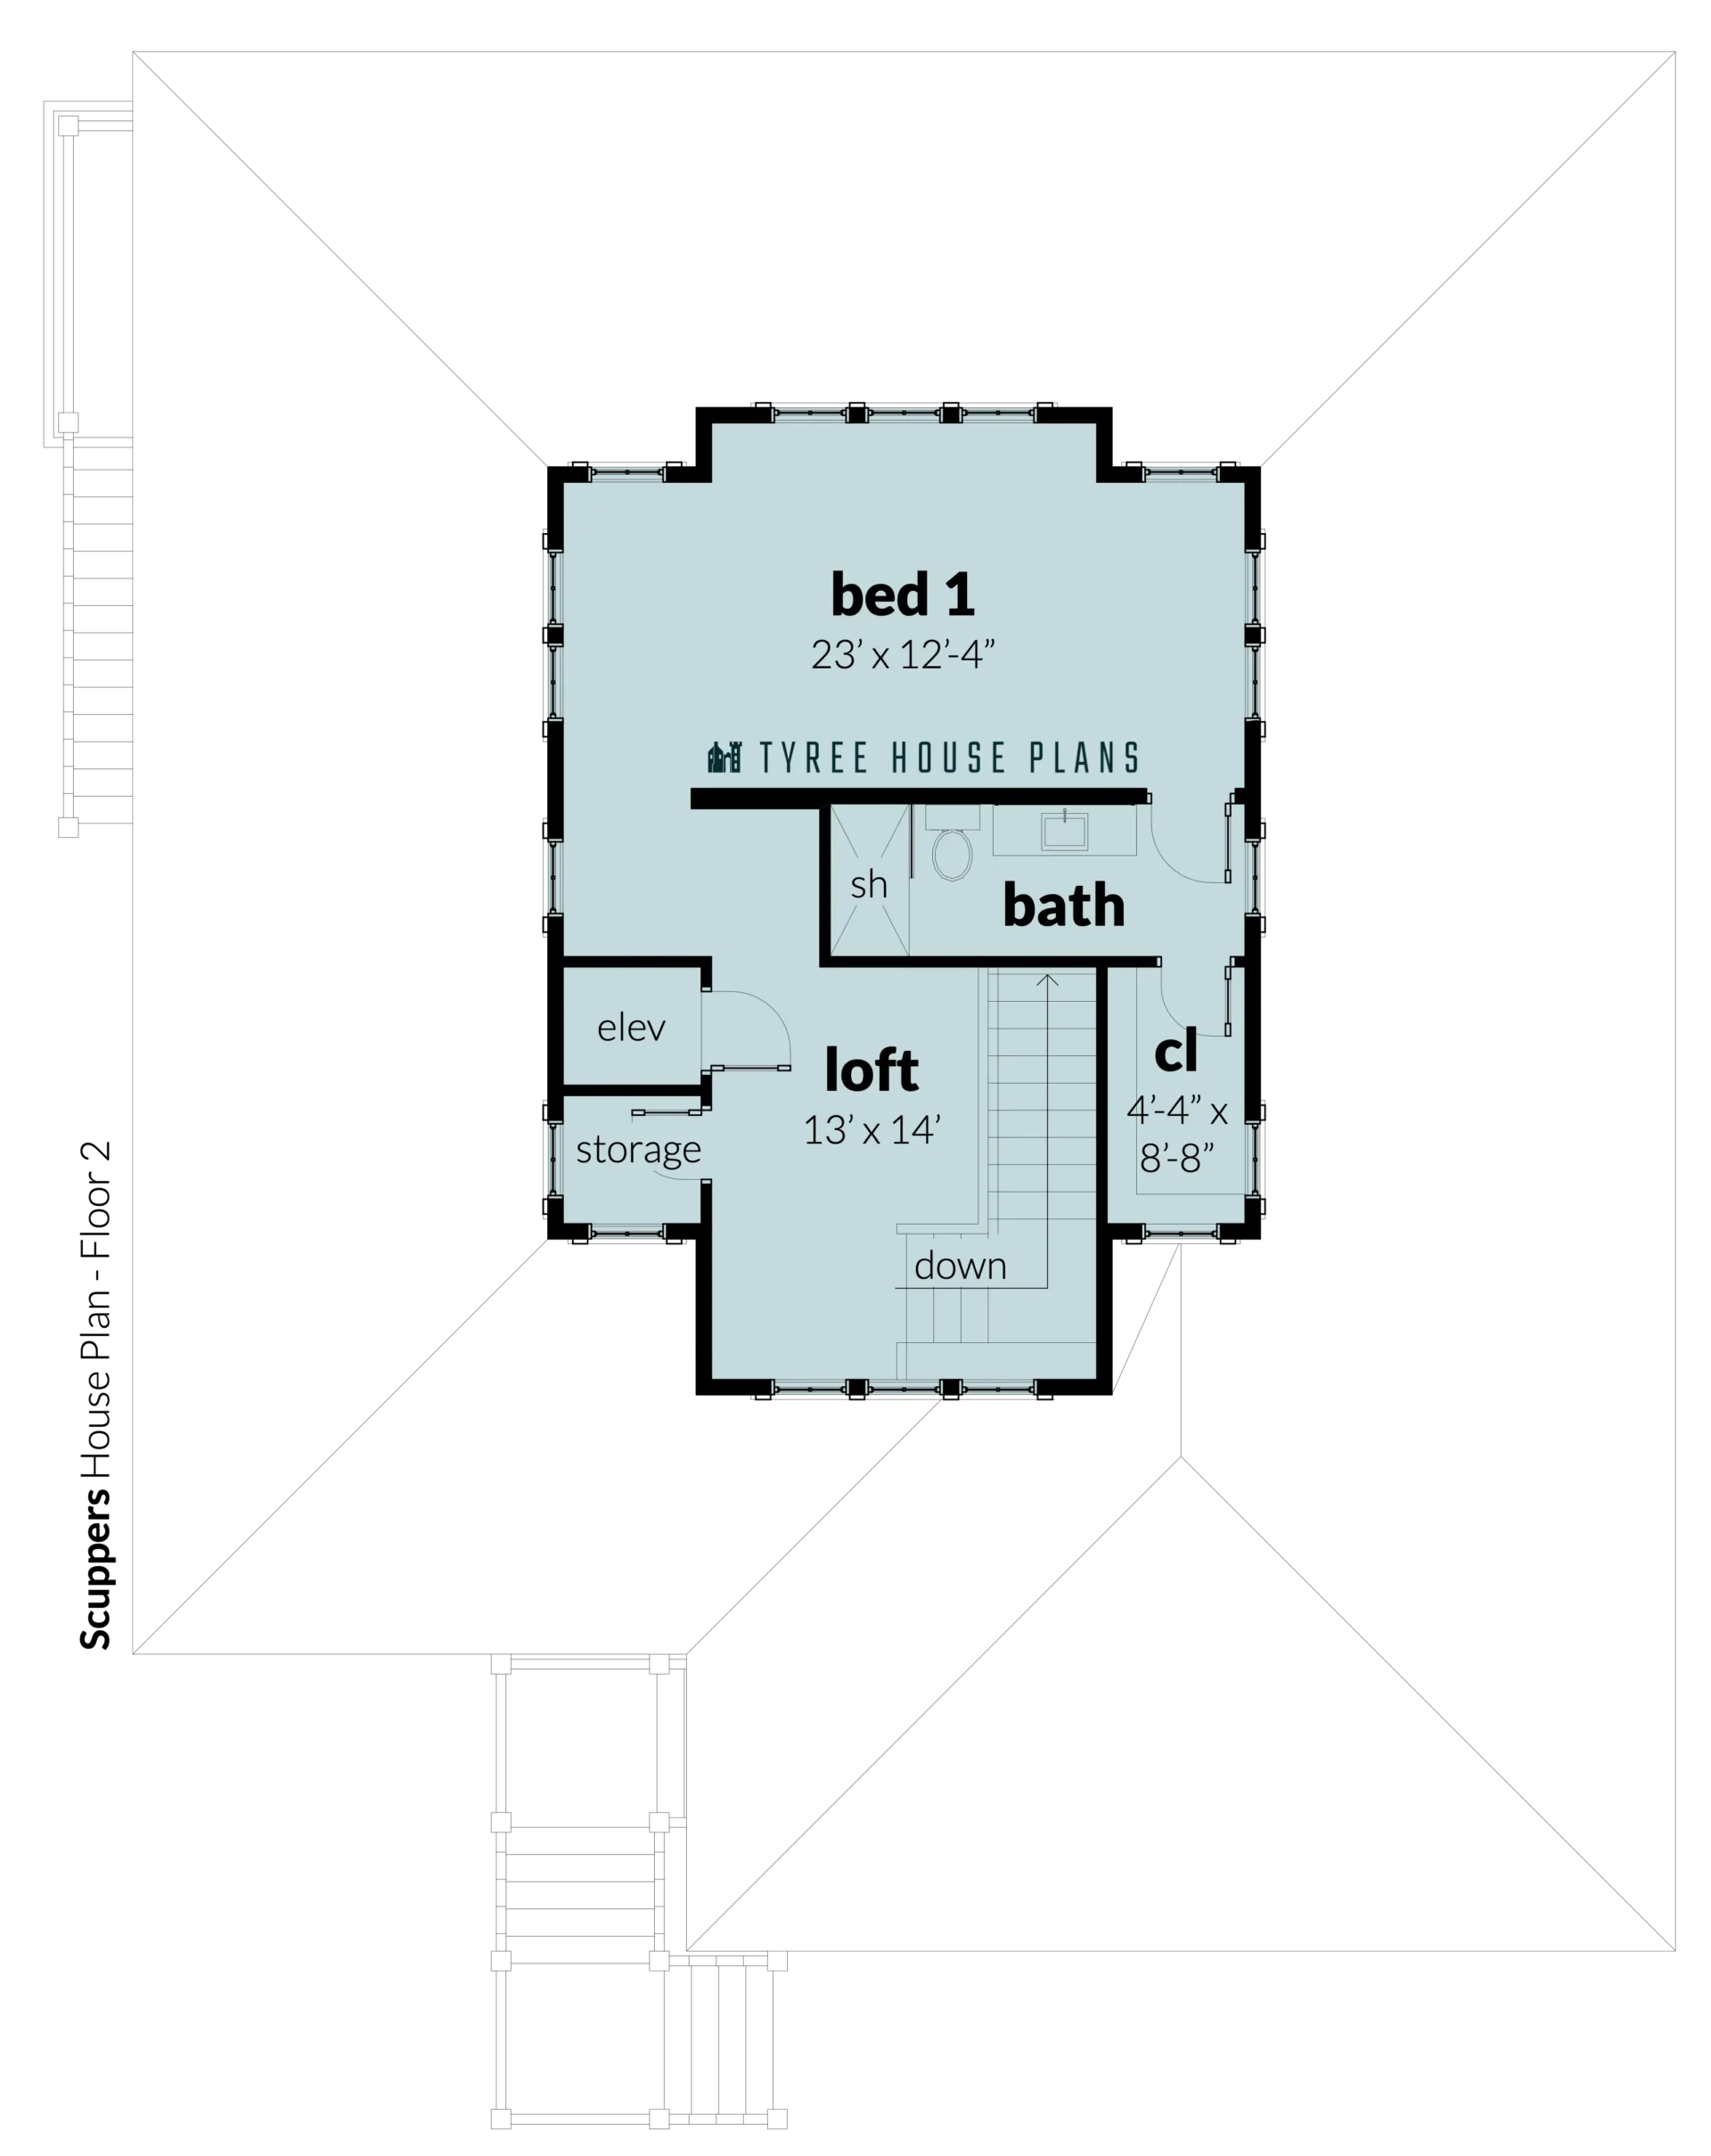 Floor 3 - Scuppers by Tyree House Plans